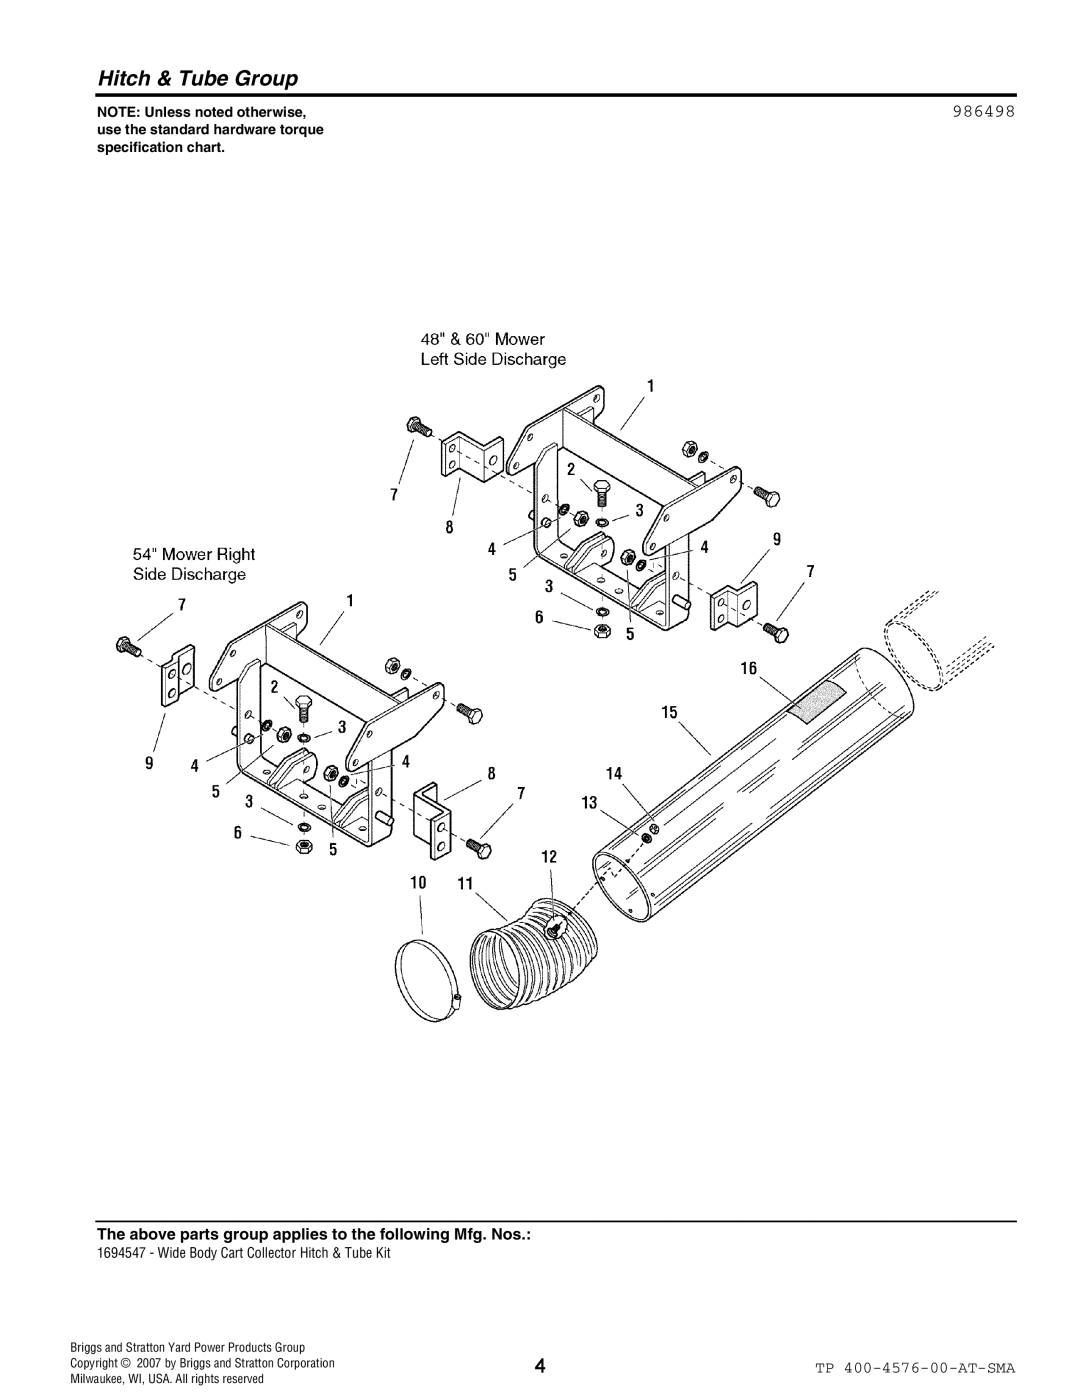 Simplicity 1694547 Hitch & Tube Group, 986498, NOTE Unless noted otherwise, Briggs and Stratton Yard Power Products Group 